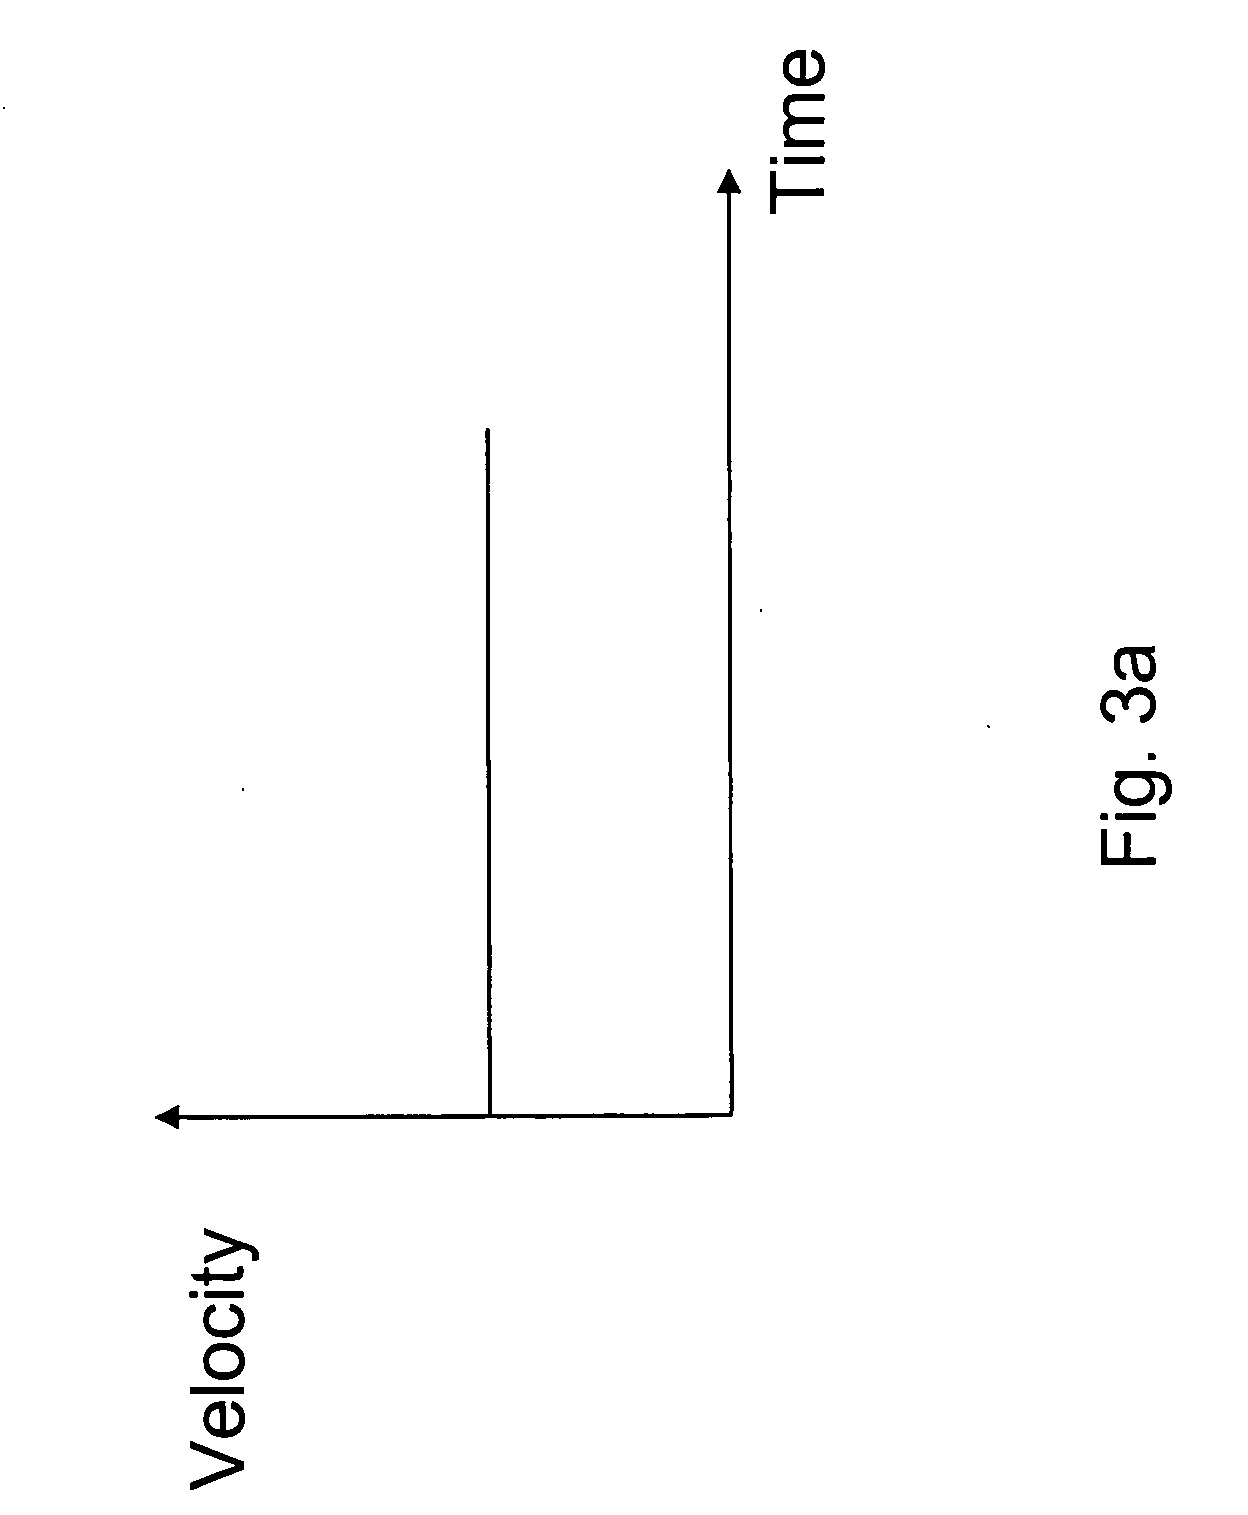 Analyte assay structure in microfluidic chip for quantitative analysis and method for using the same